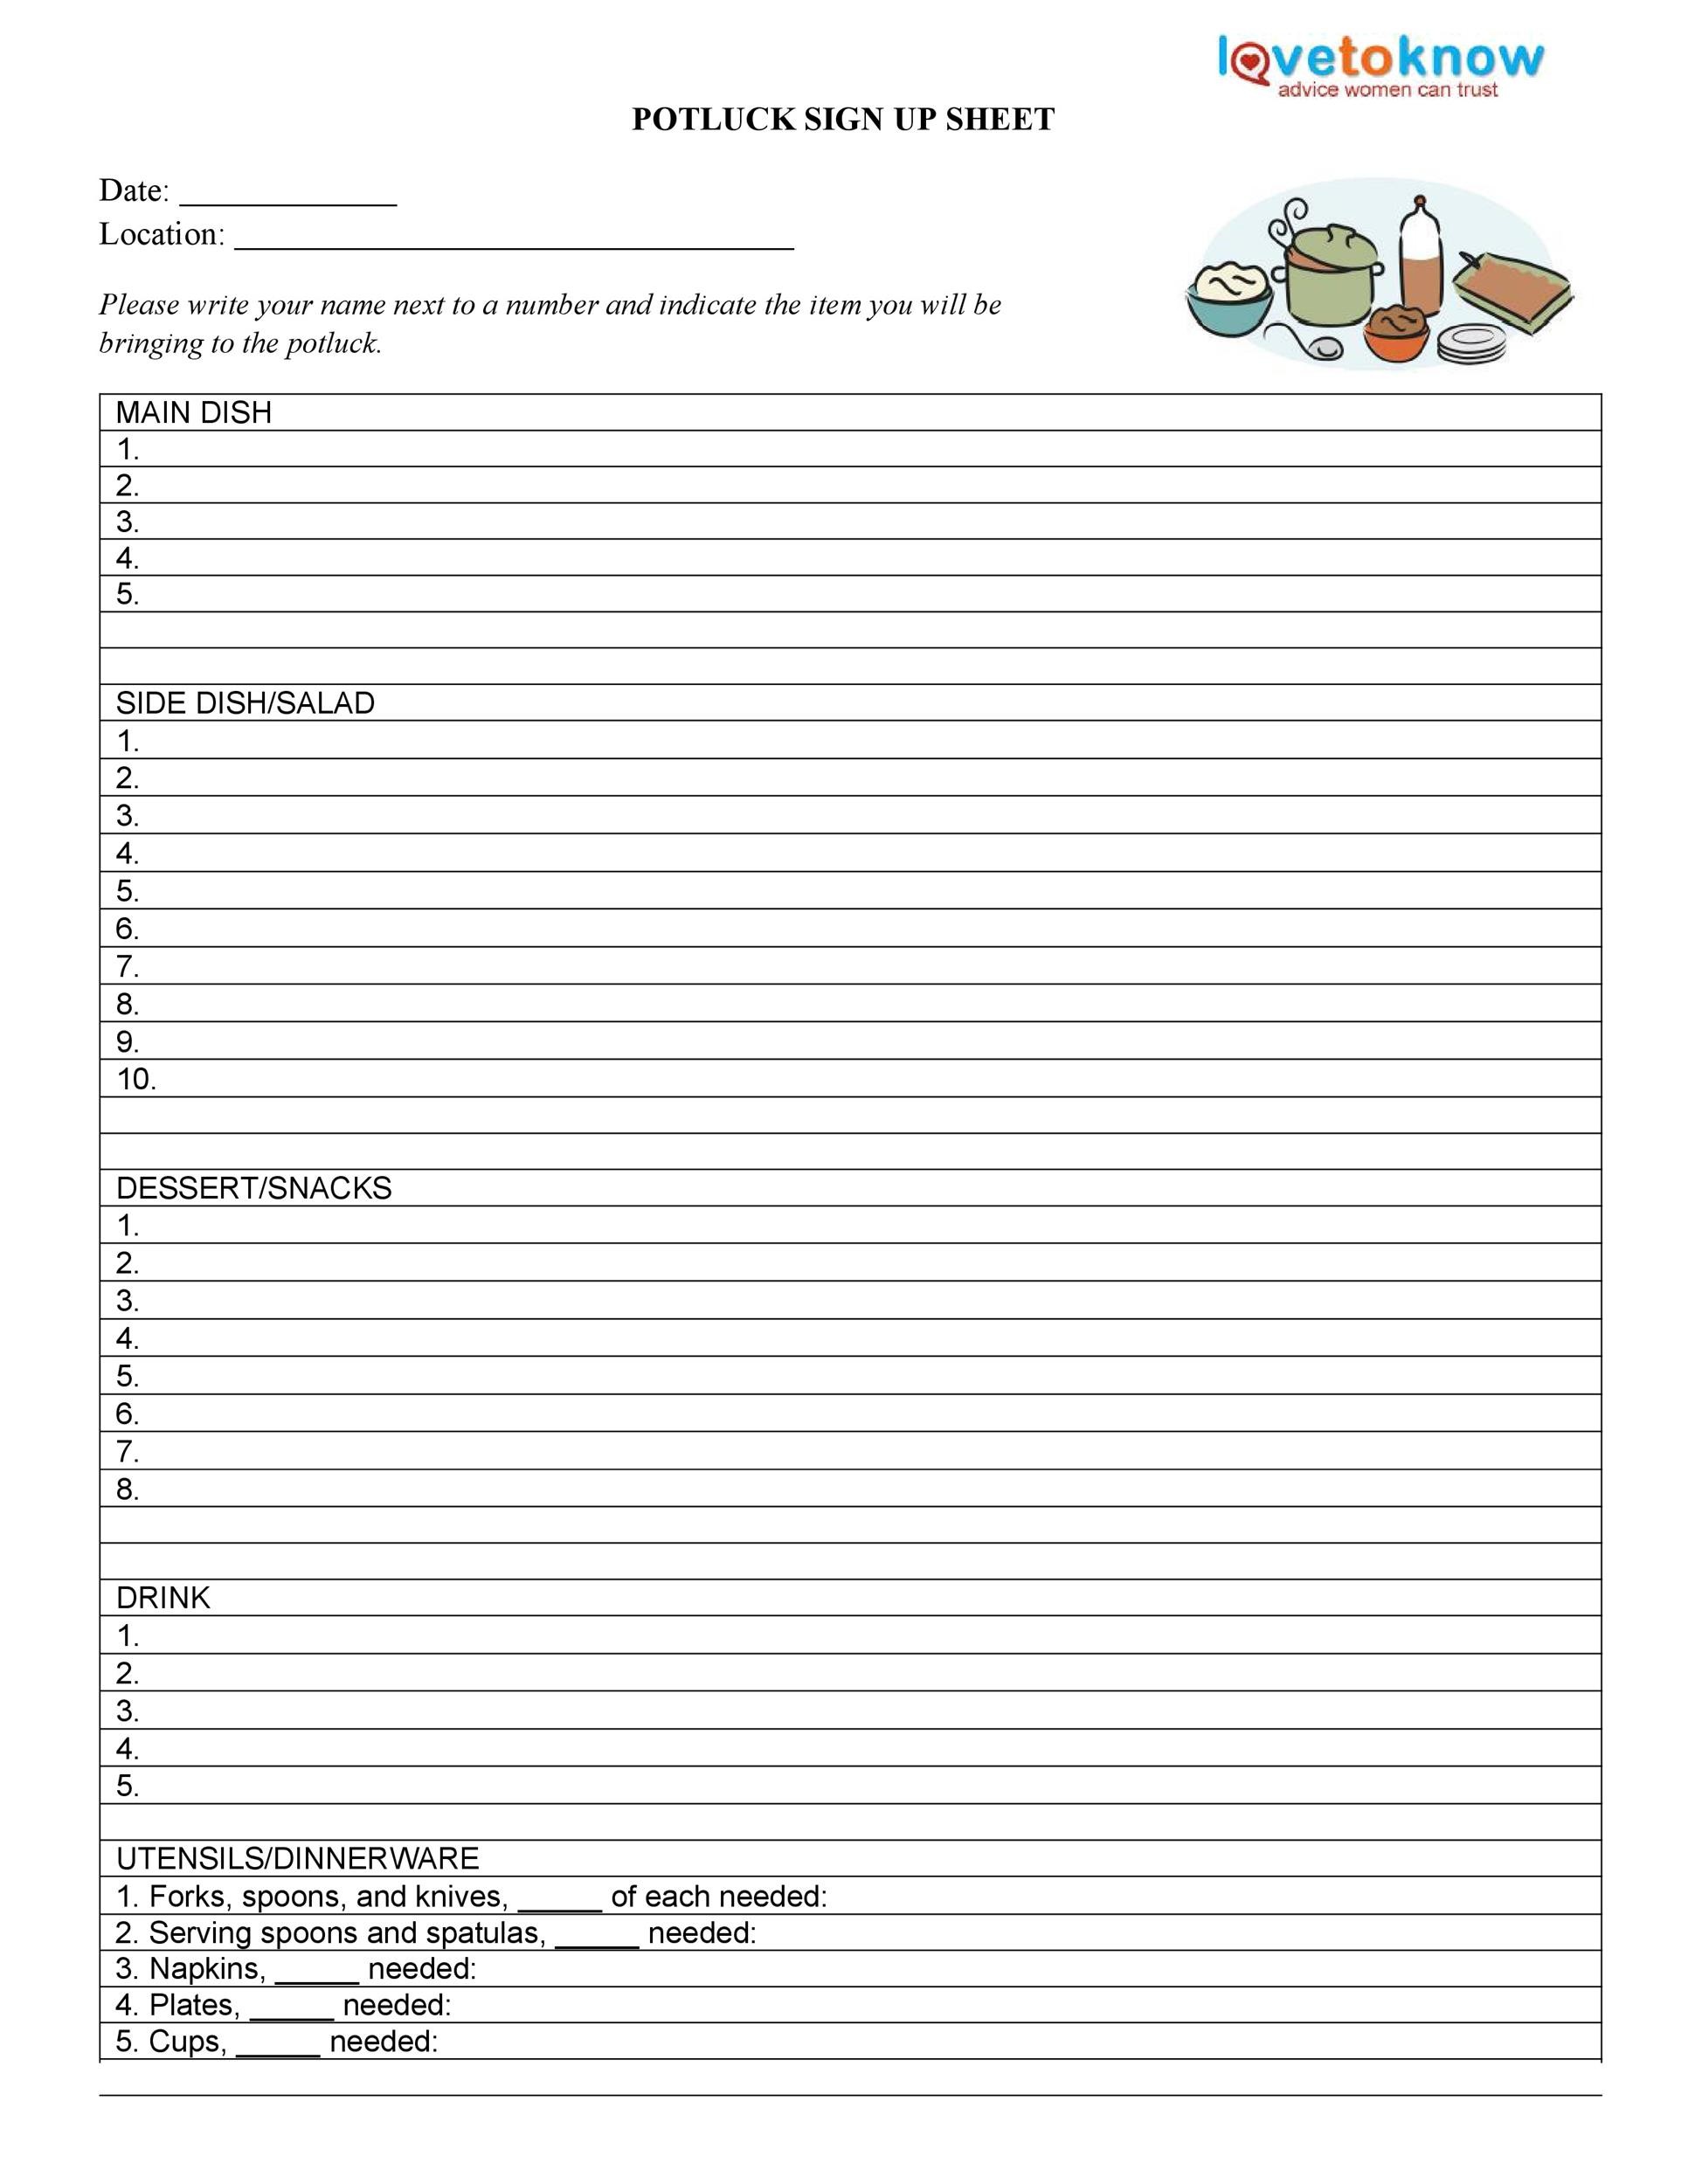 Potluck Sign Up Sheet Template Excel Printable Form, Templates and Letter